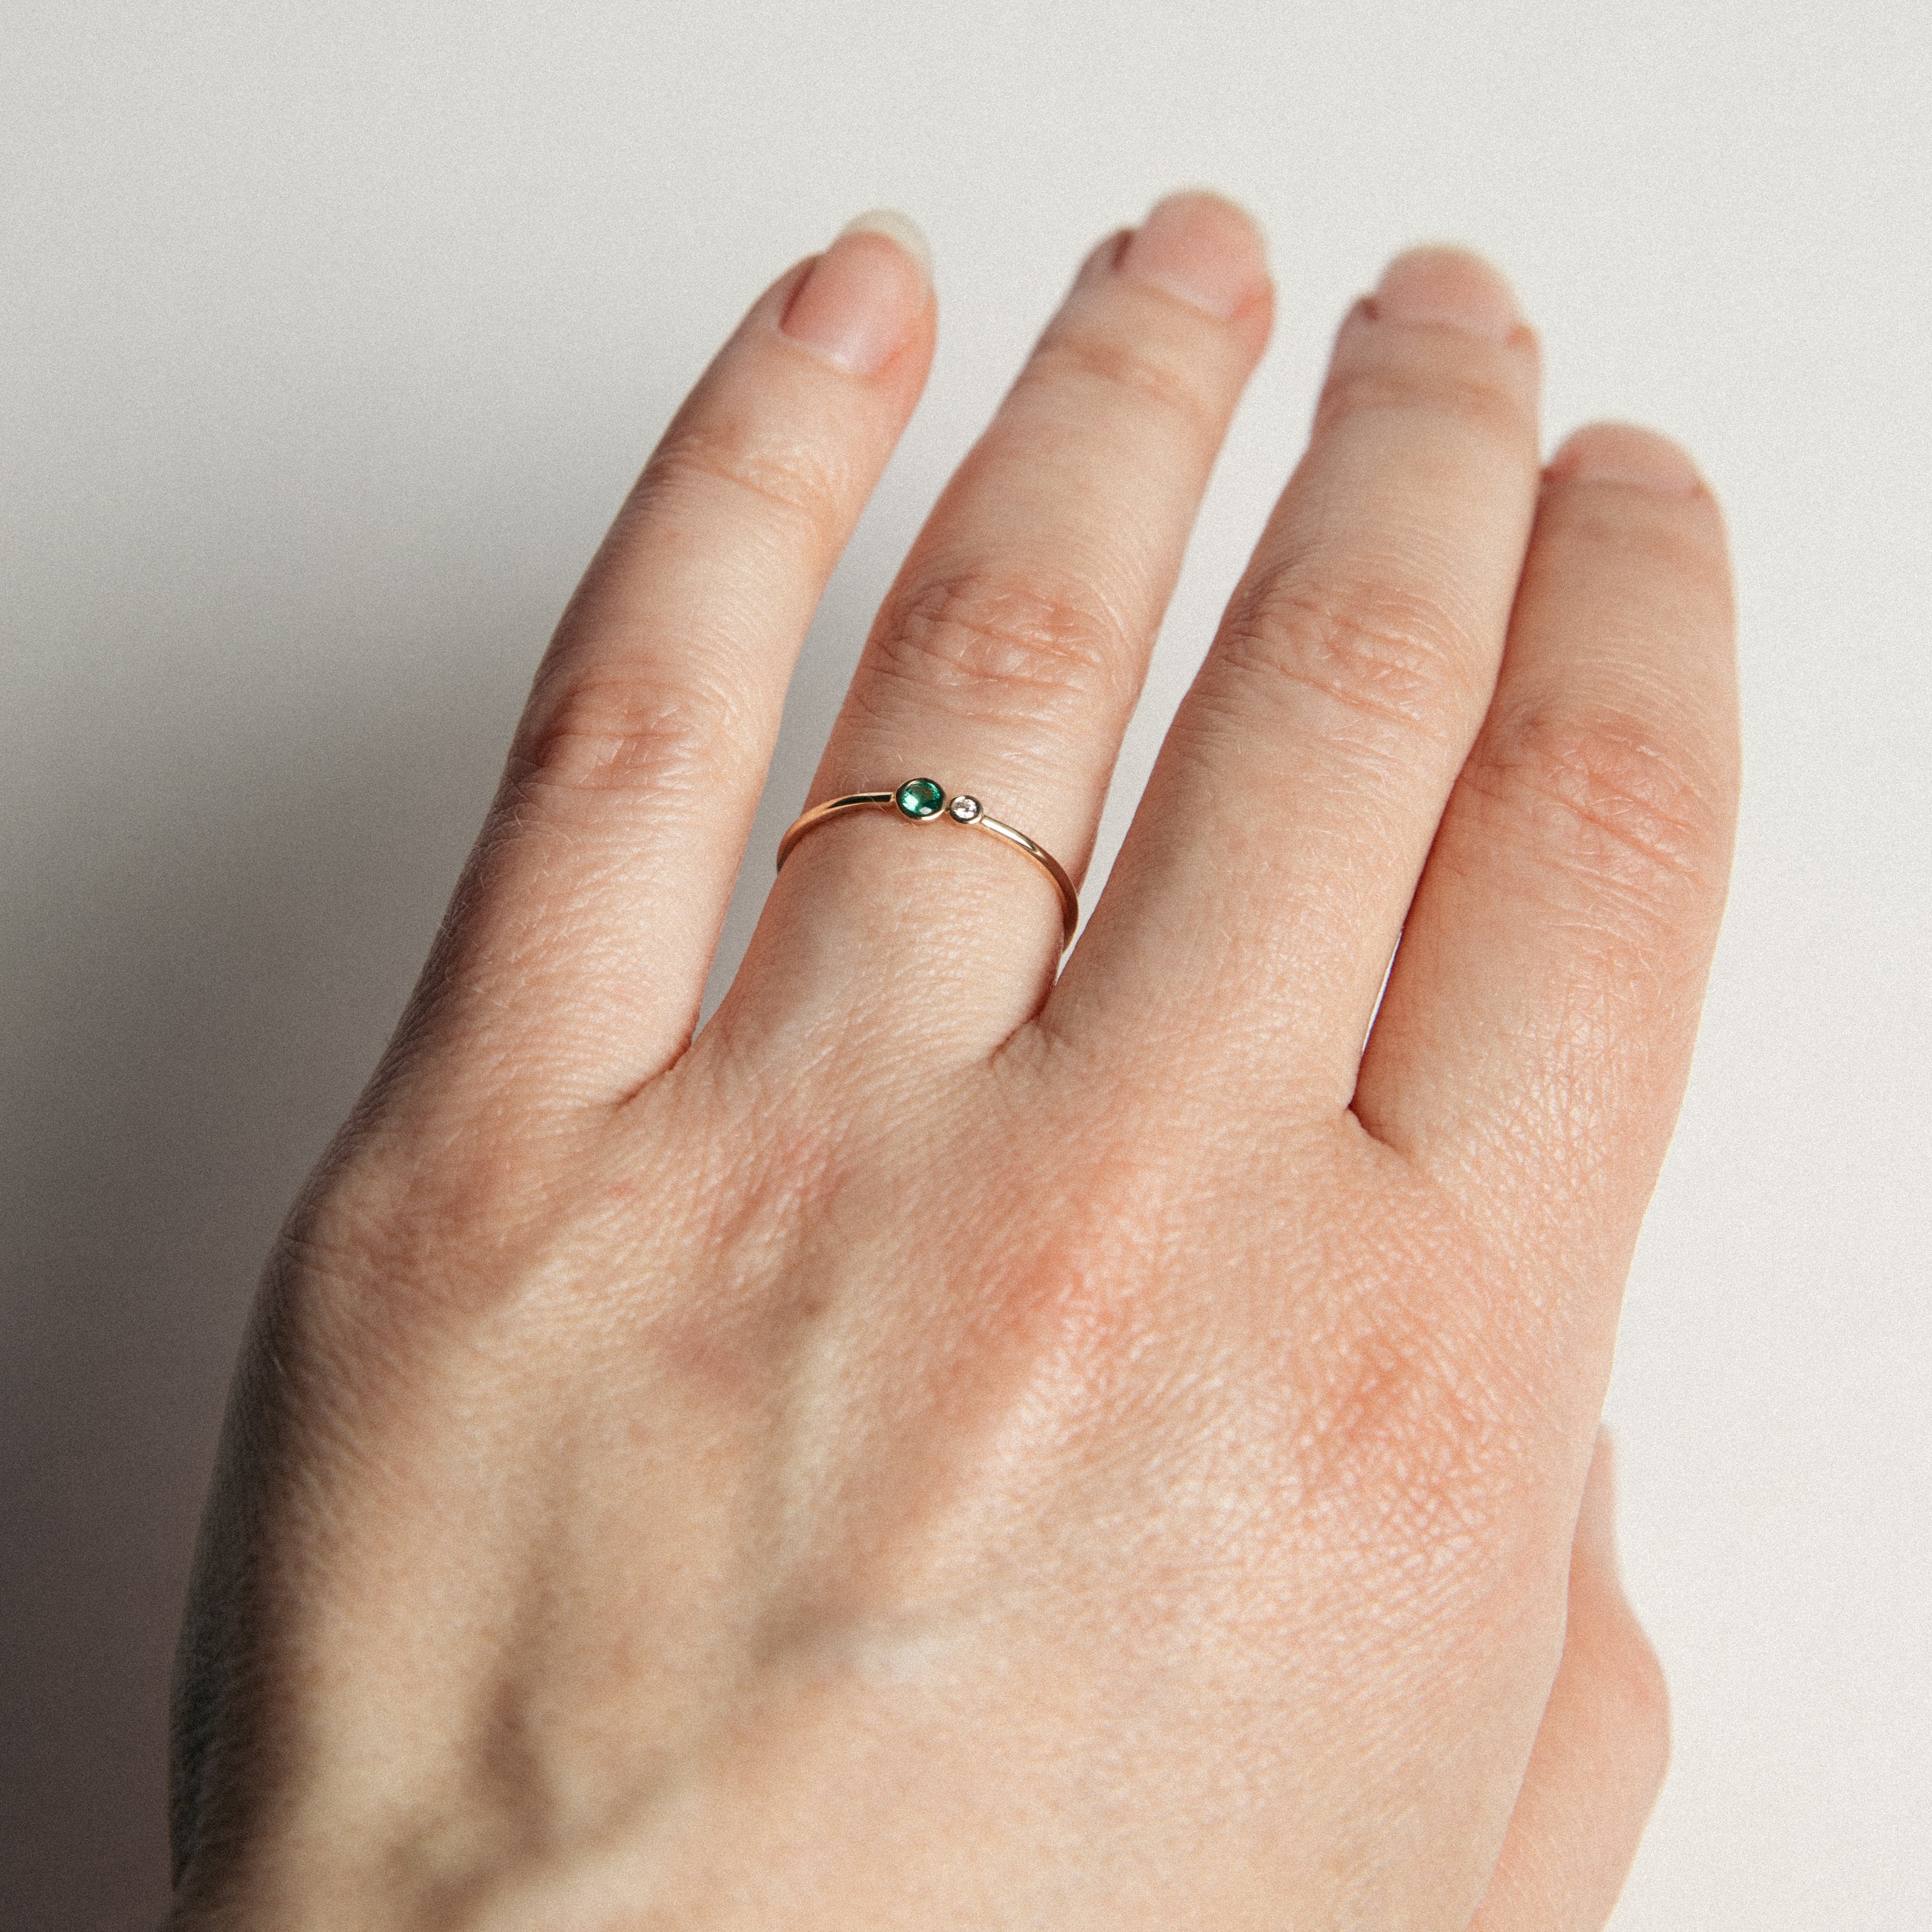 Kiki Stackable Ring in 14k Gold set with Emerald by SHW Fine Jewelry NYC